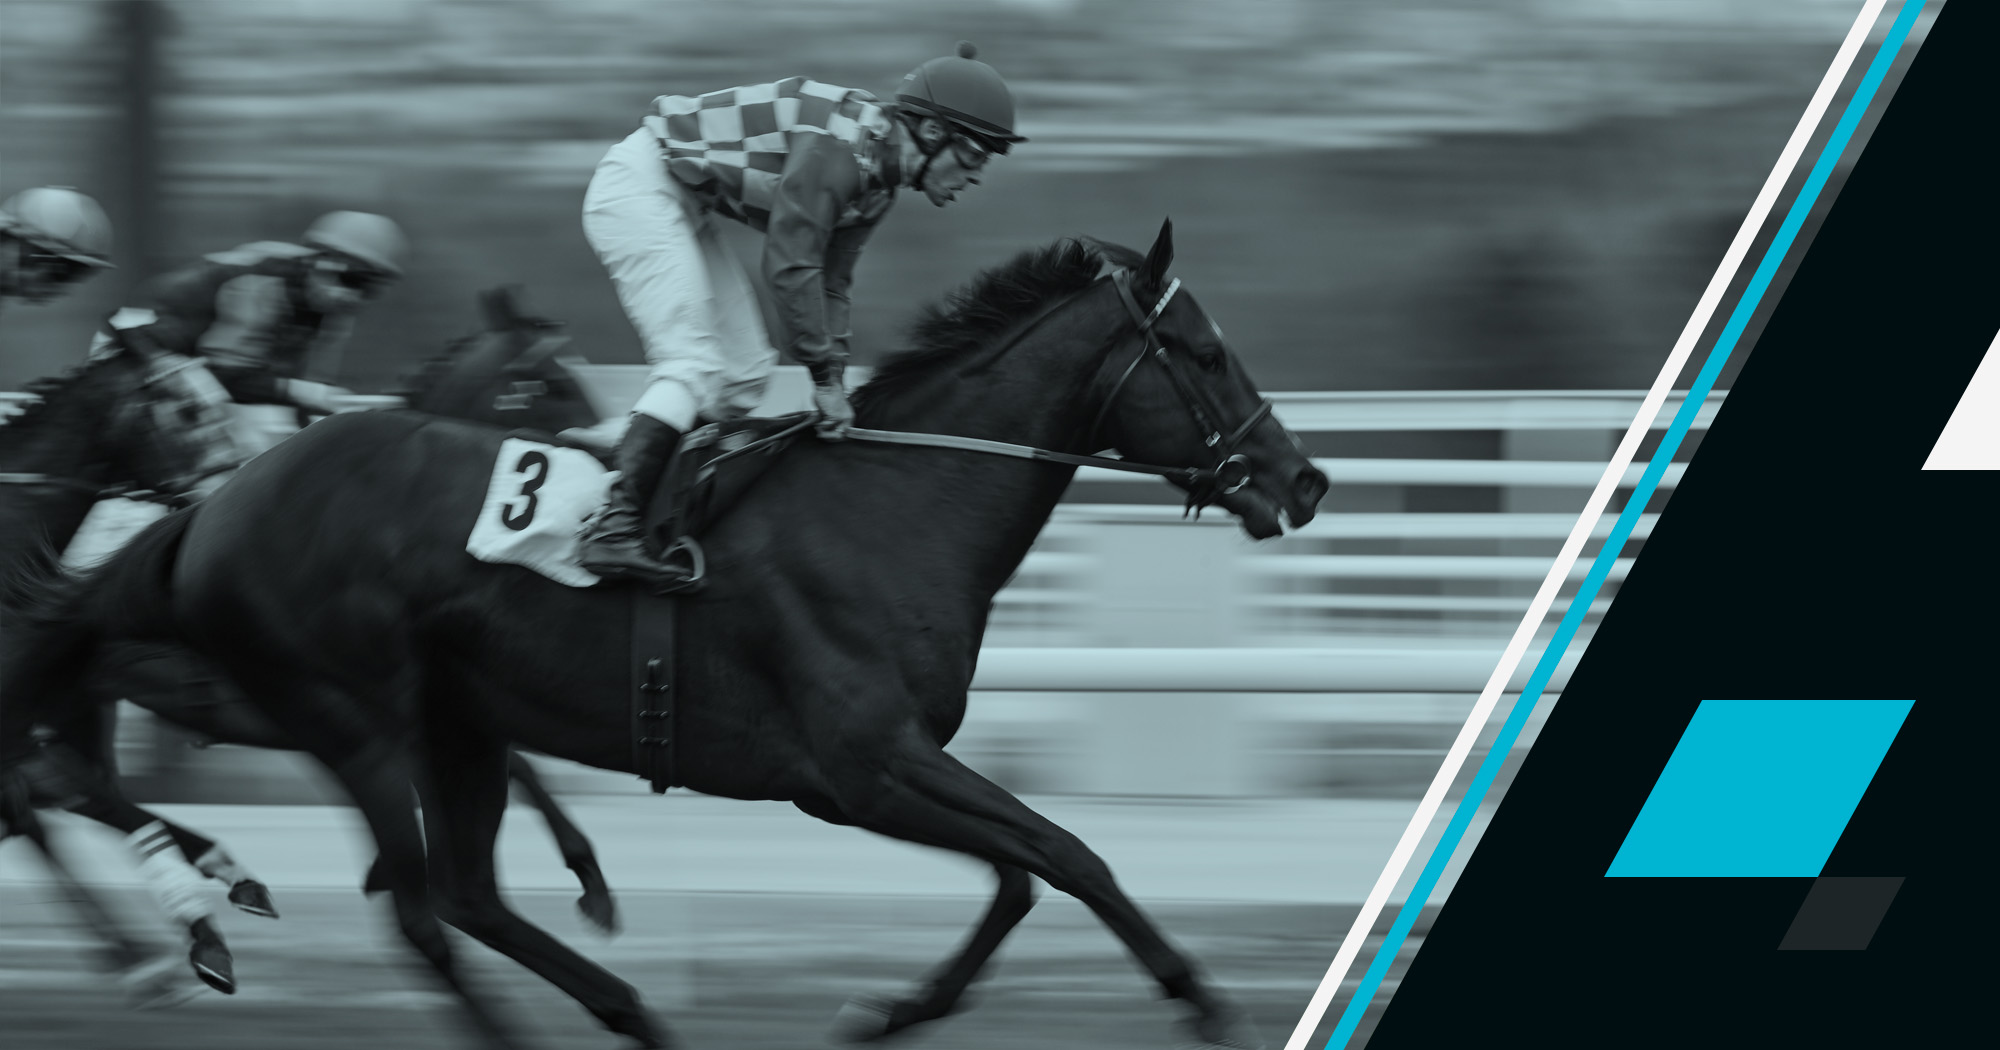 Global Tote, SaaS Tote Wagering Solution